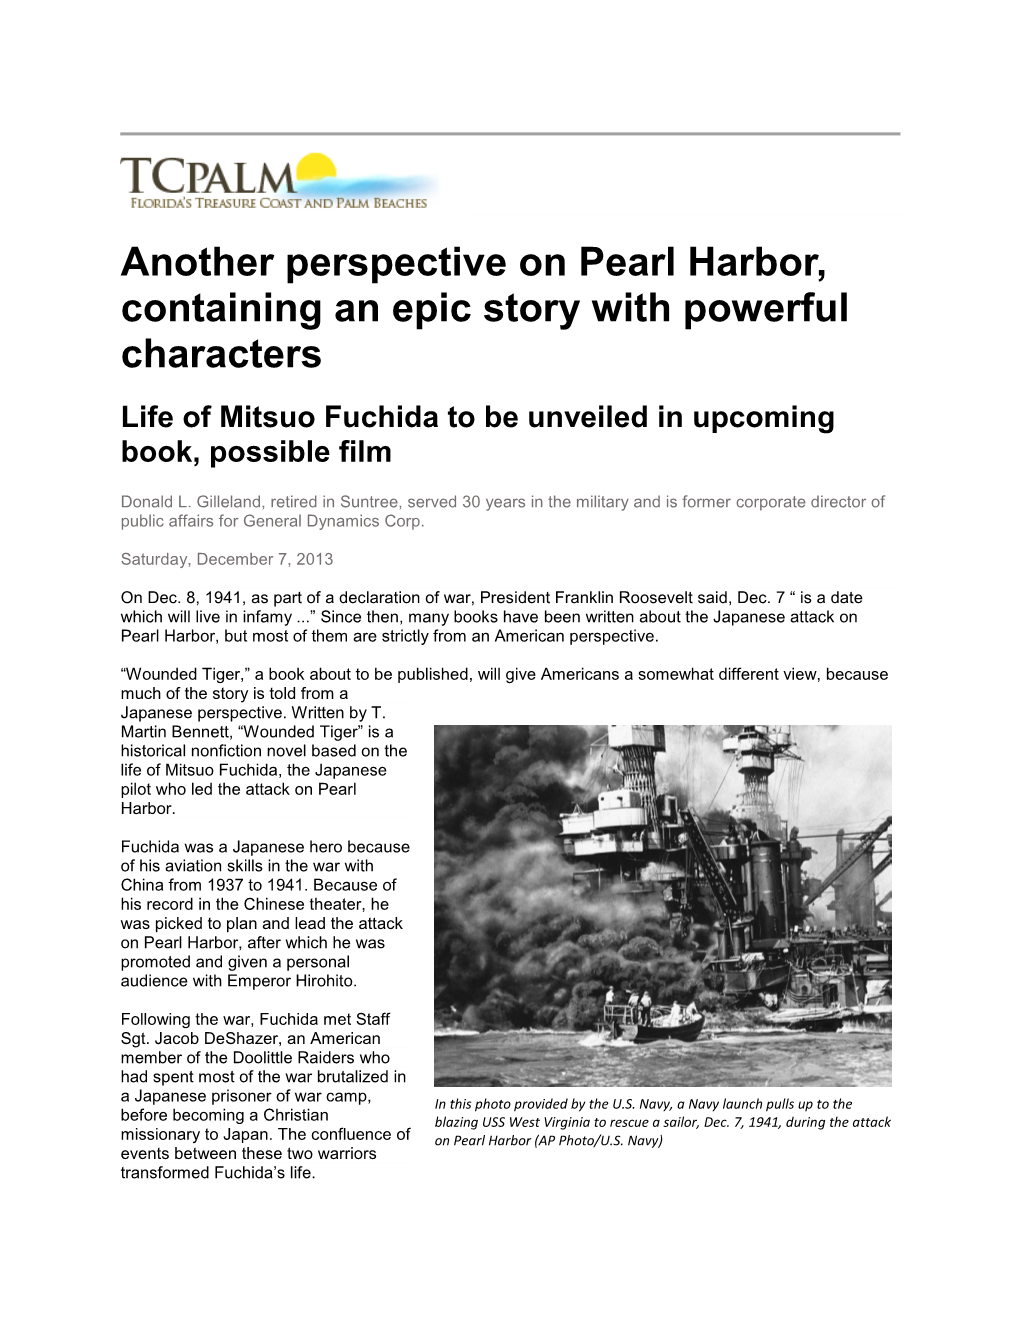 Another Perspective on Pearl Harbor, Containing an Epic Story with Powerful Characters Life of Mitsuo Fuchida to Be Unveiled in Upcoming Book, Possible Film